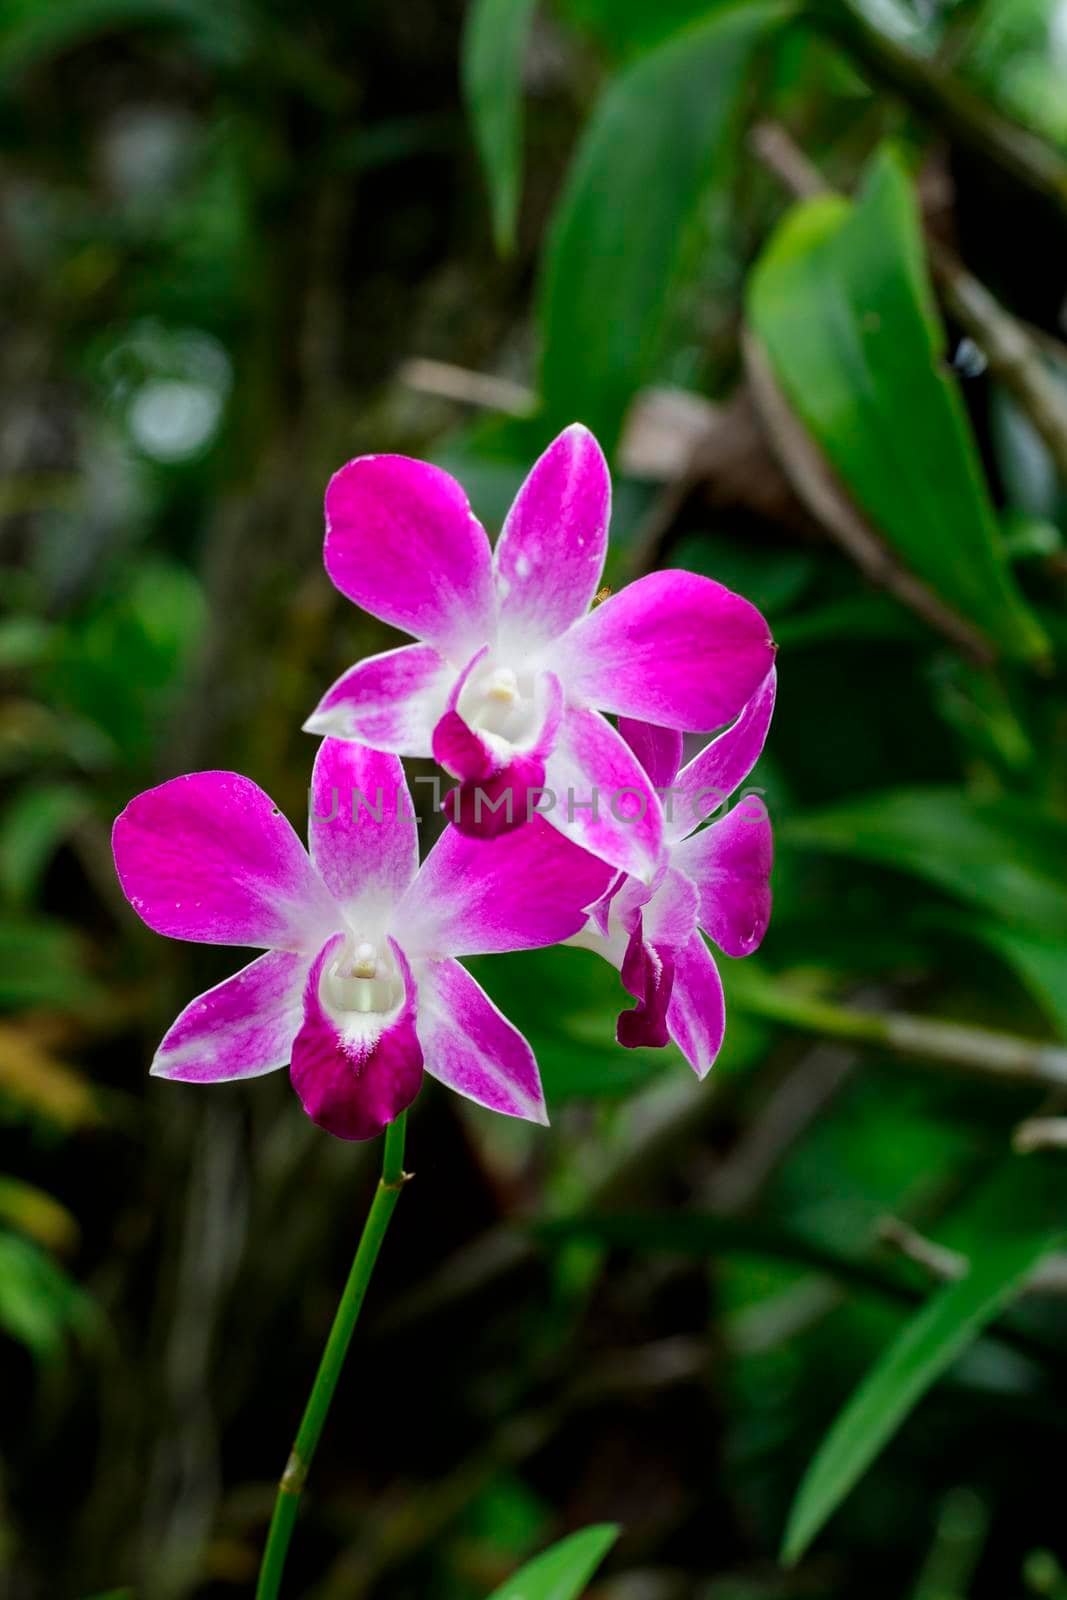 Image of beautiful violet orchid flowers in the garden.